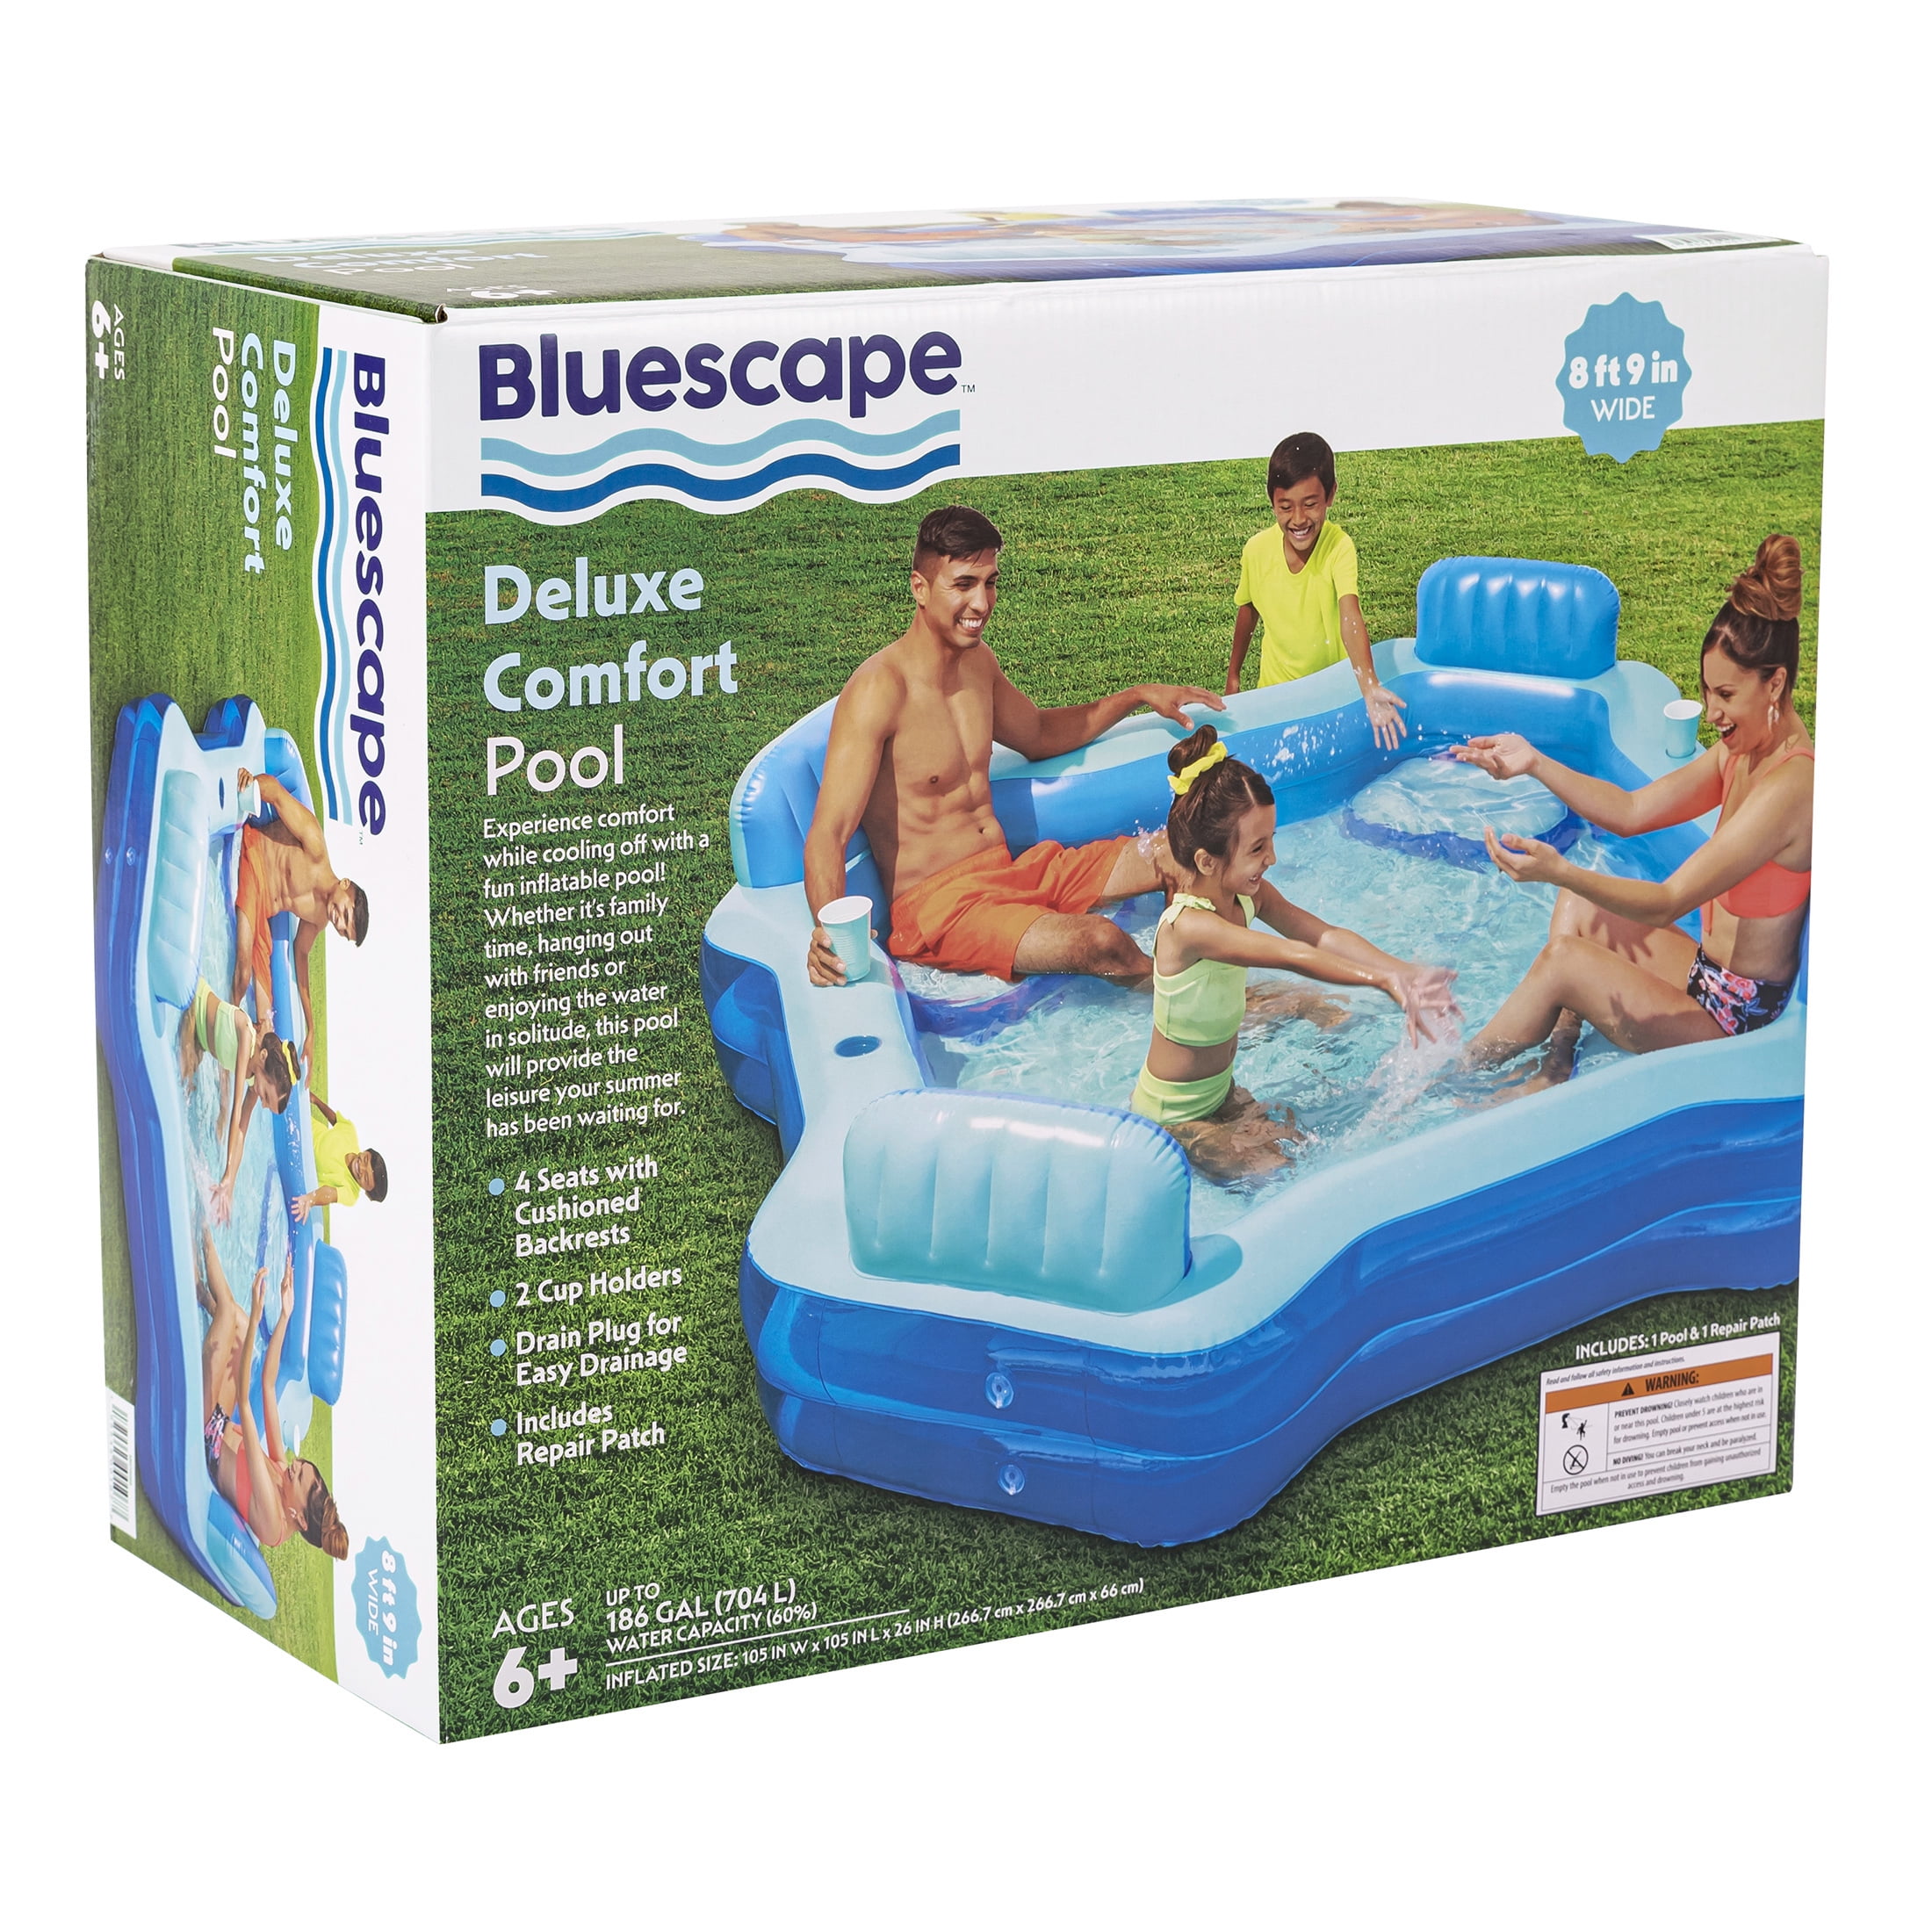 Bluescape Blue Deluxe Comfort Inflatable Family Swimming Pool, 4 Seats, Square, Age 6 & up